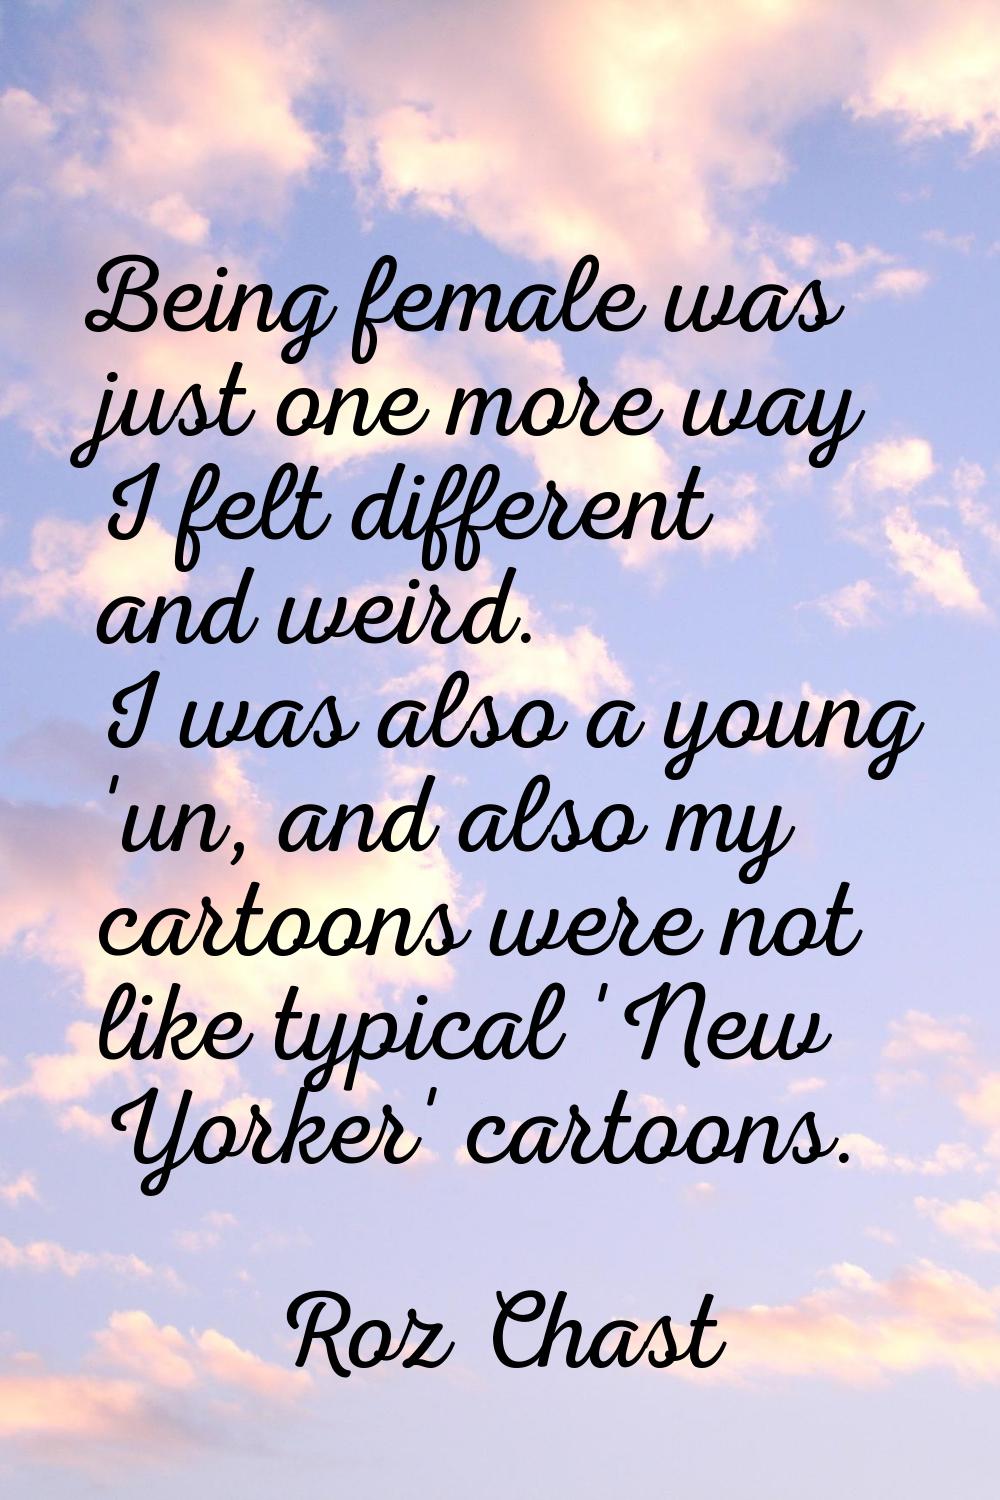 Being female was just one more way I felt different and weird. I was also a young 'un, and also my 